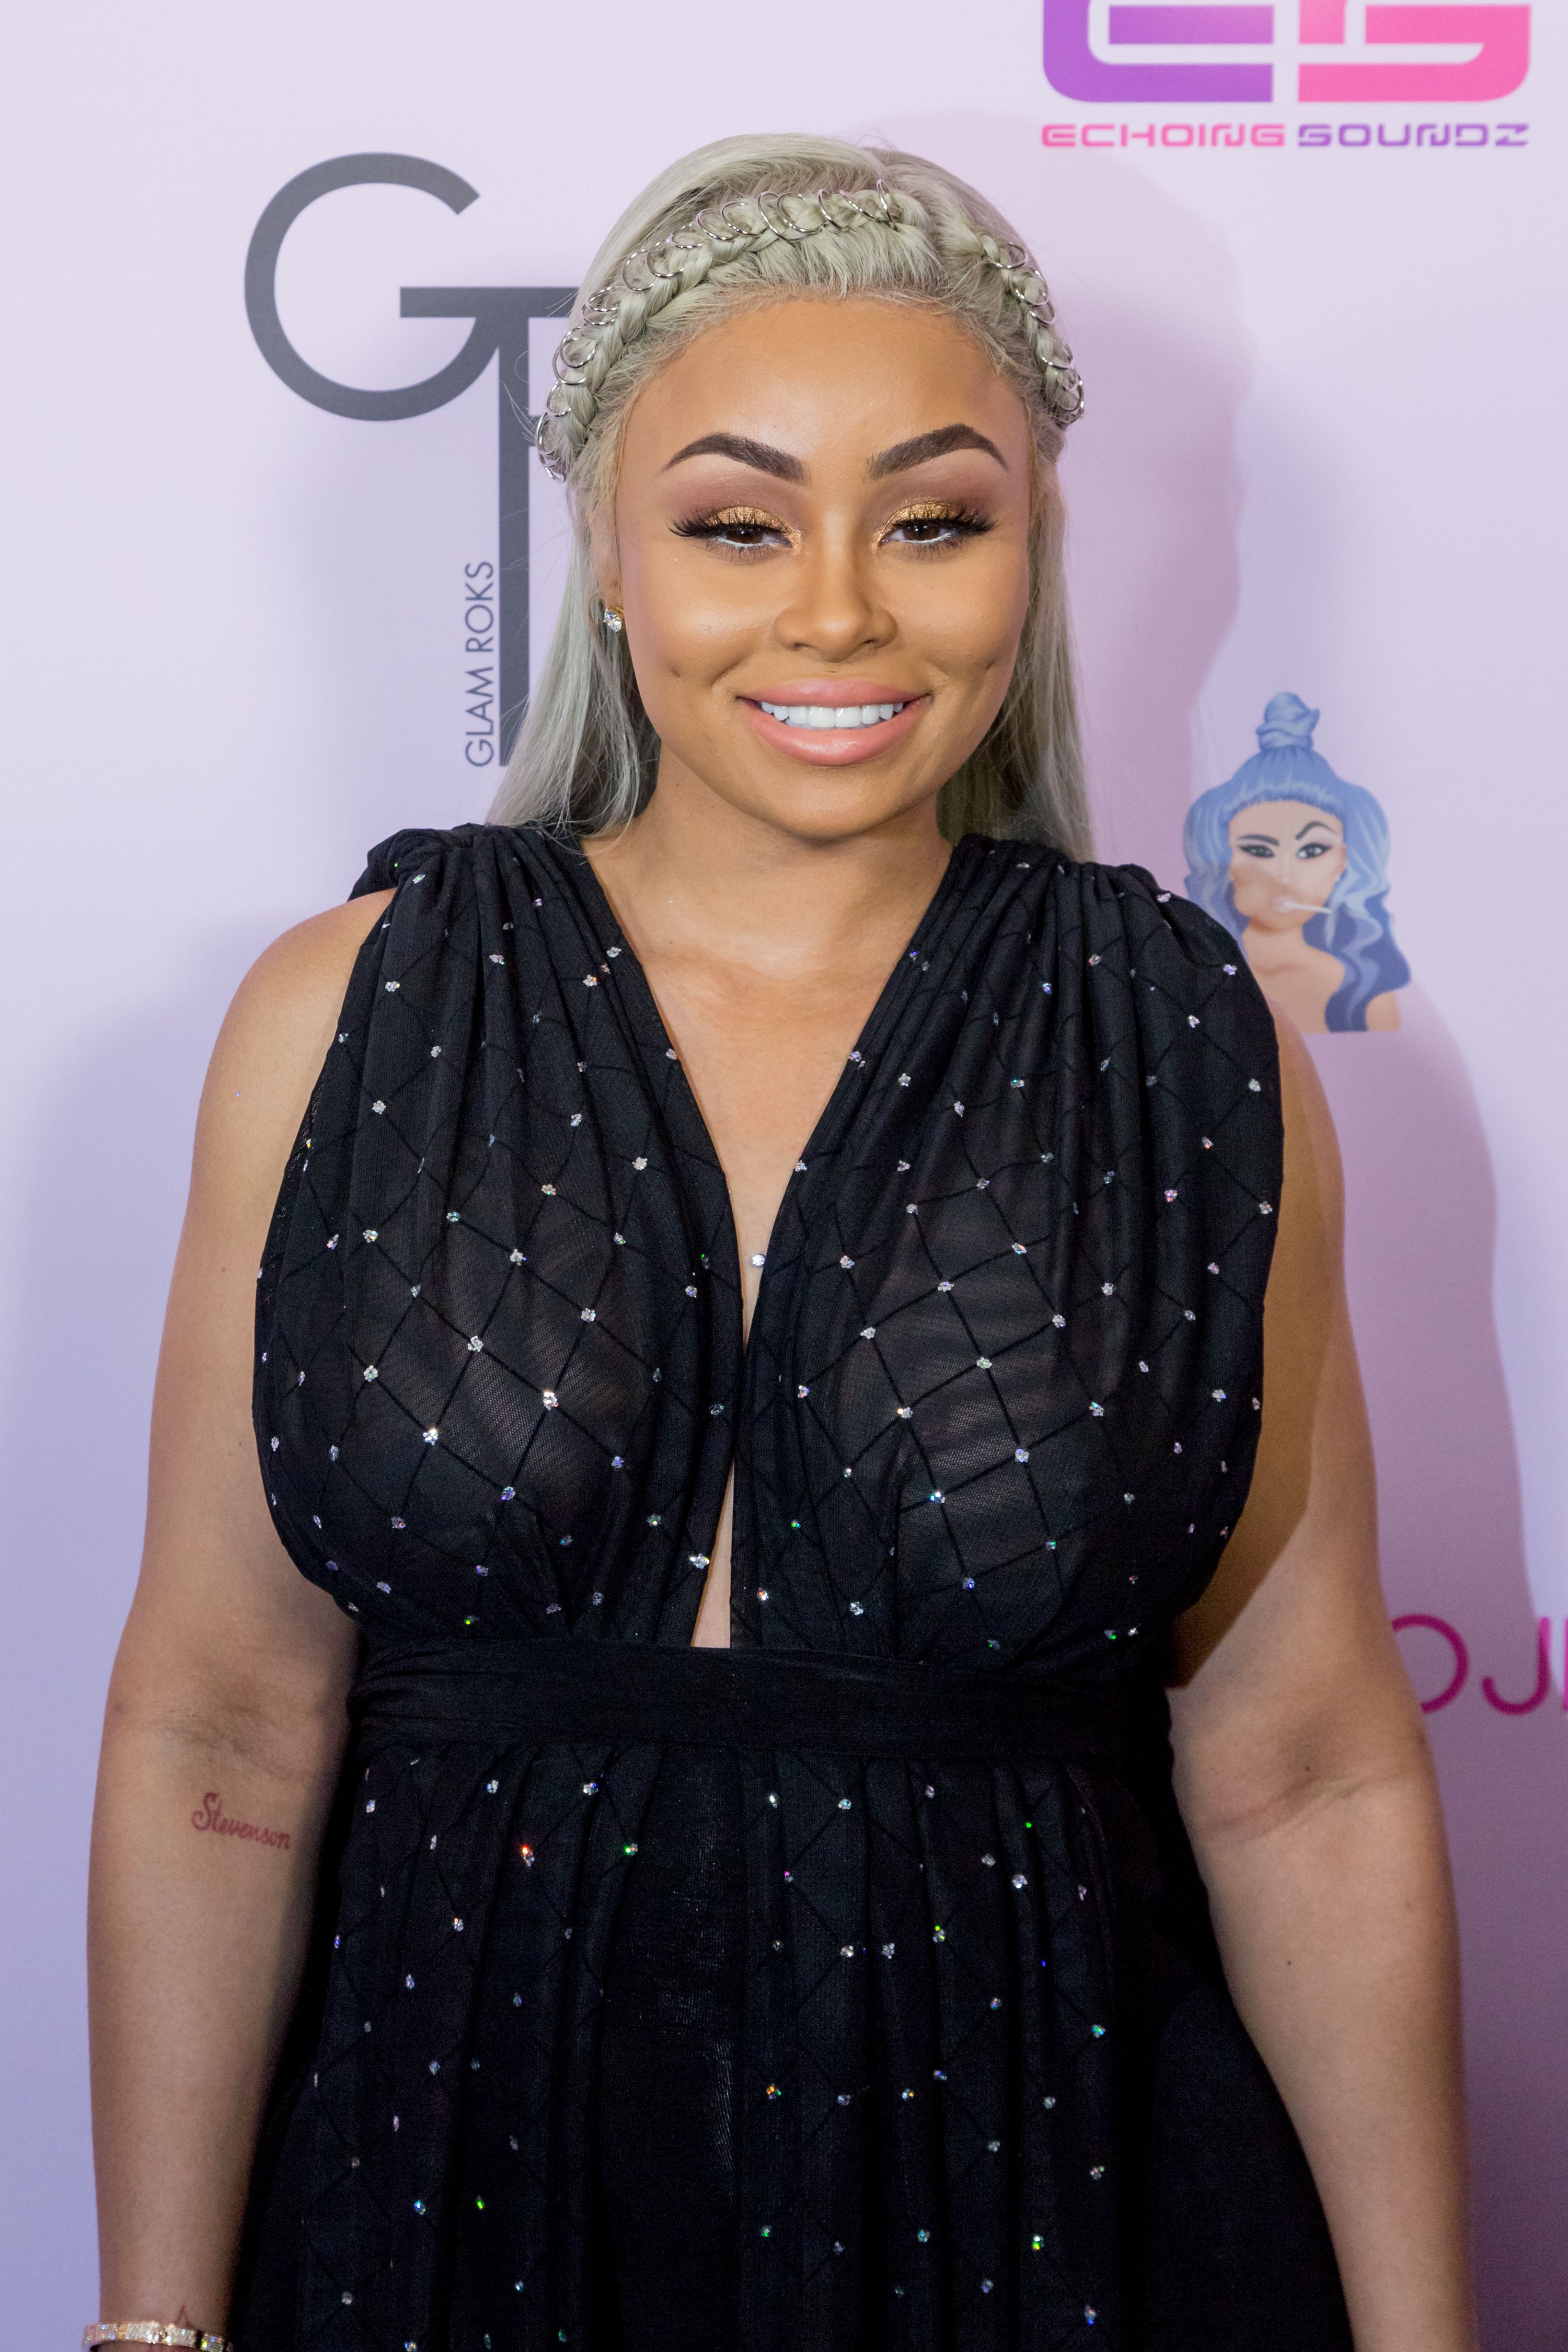  Blac Chyna arrives at her Blac Chyna Birthday Celebration And Unveiling Of Her "Chymoji" Emoji Collection at the Hard Rock Cafe on May 10, 2016 in Hollywood, California | Photo: Getty Images 